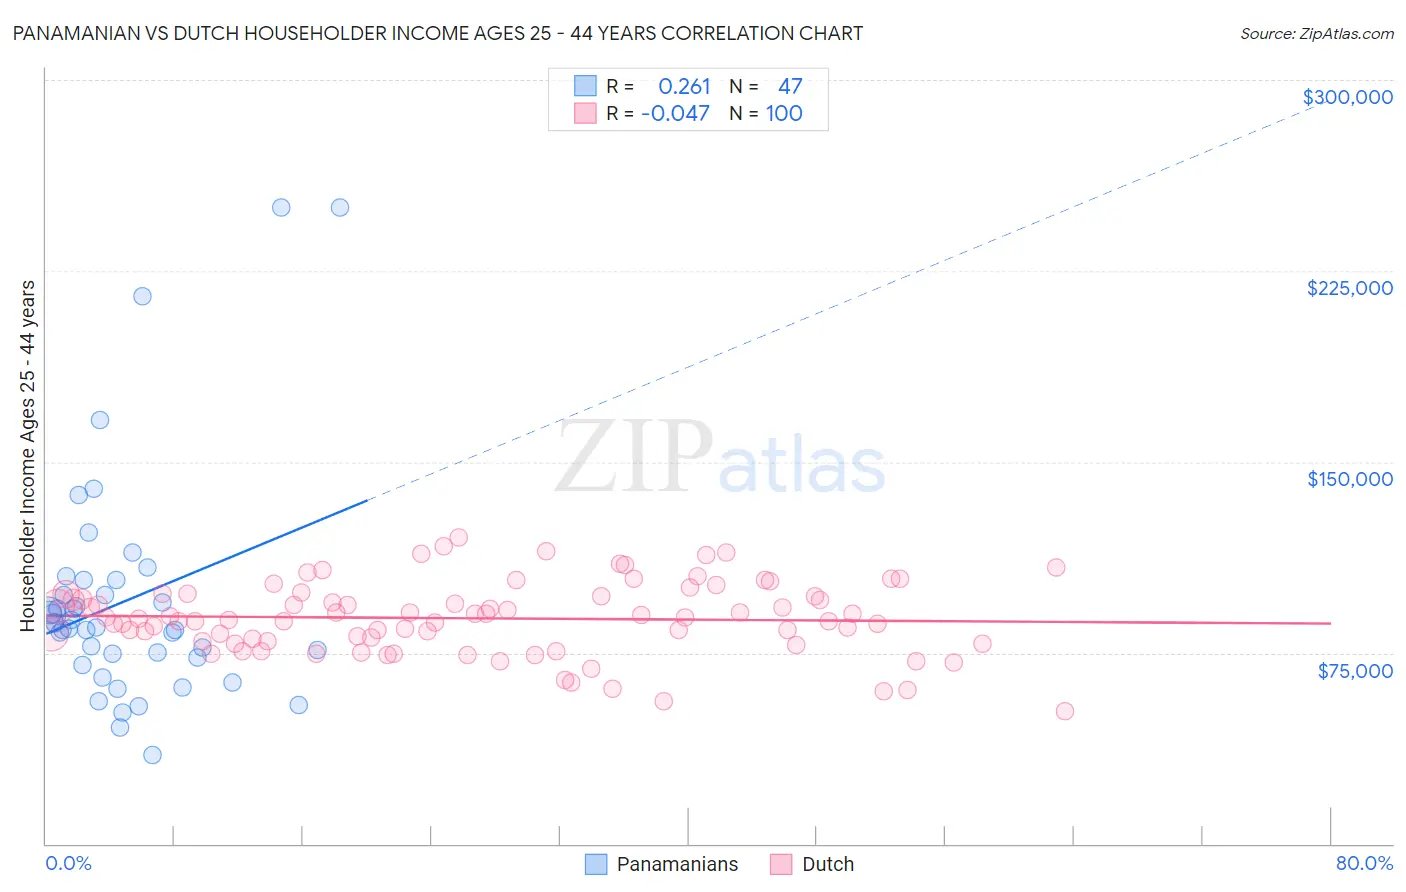 Panamanian vs Dutch Householder Income Ages 25 - 44 years